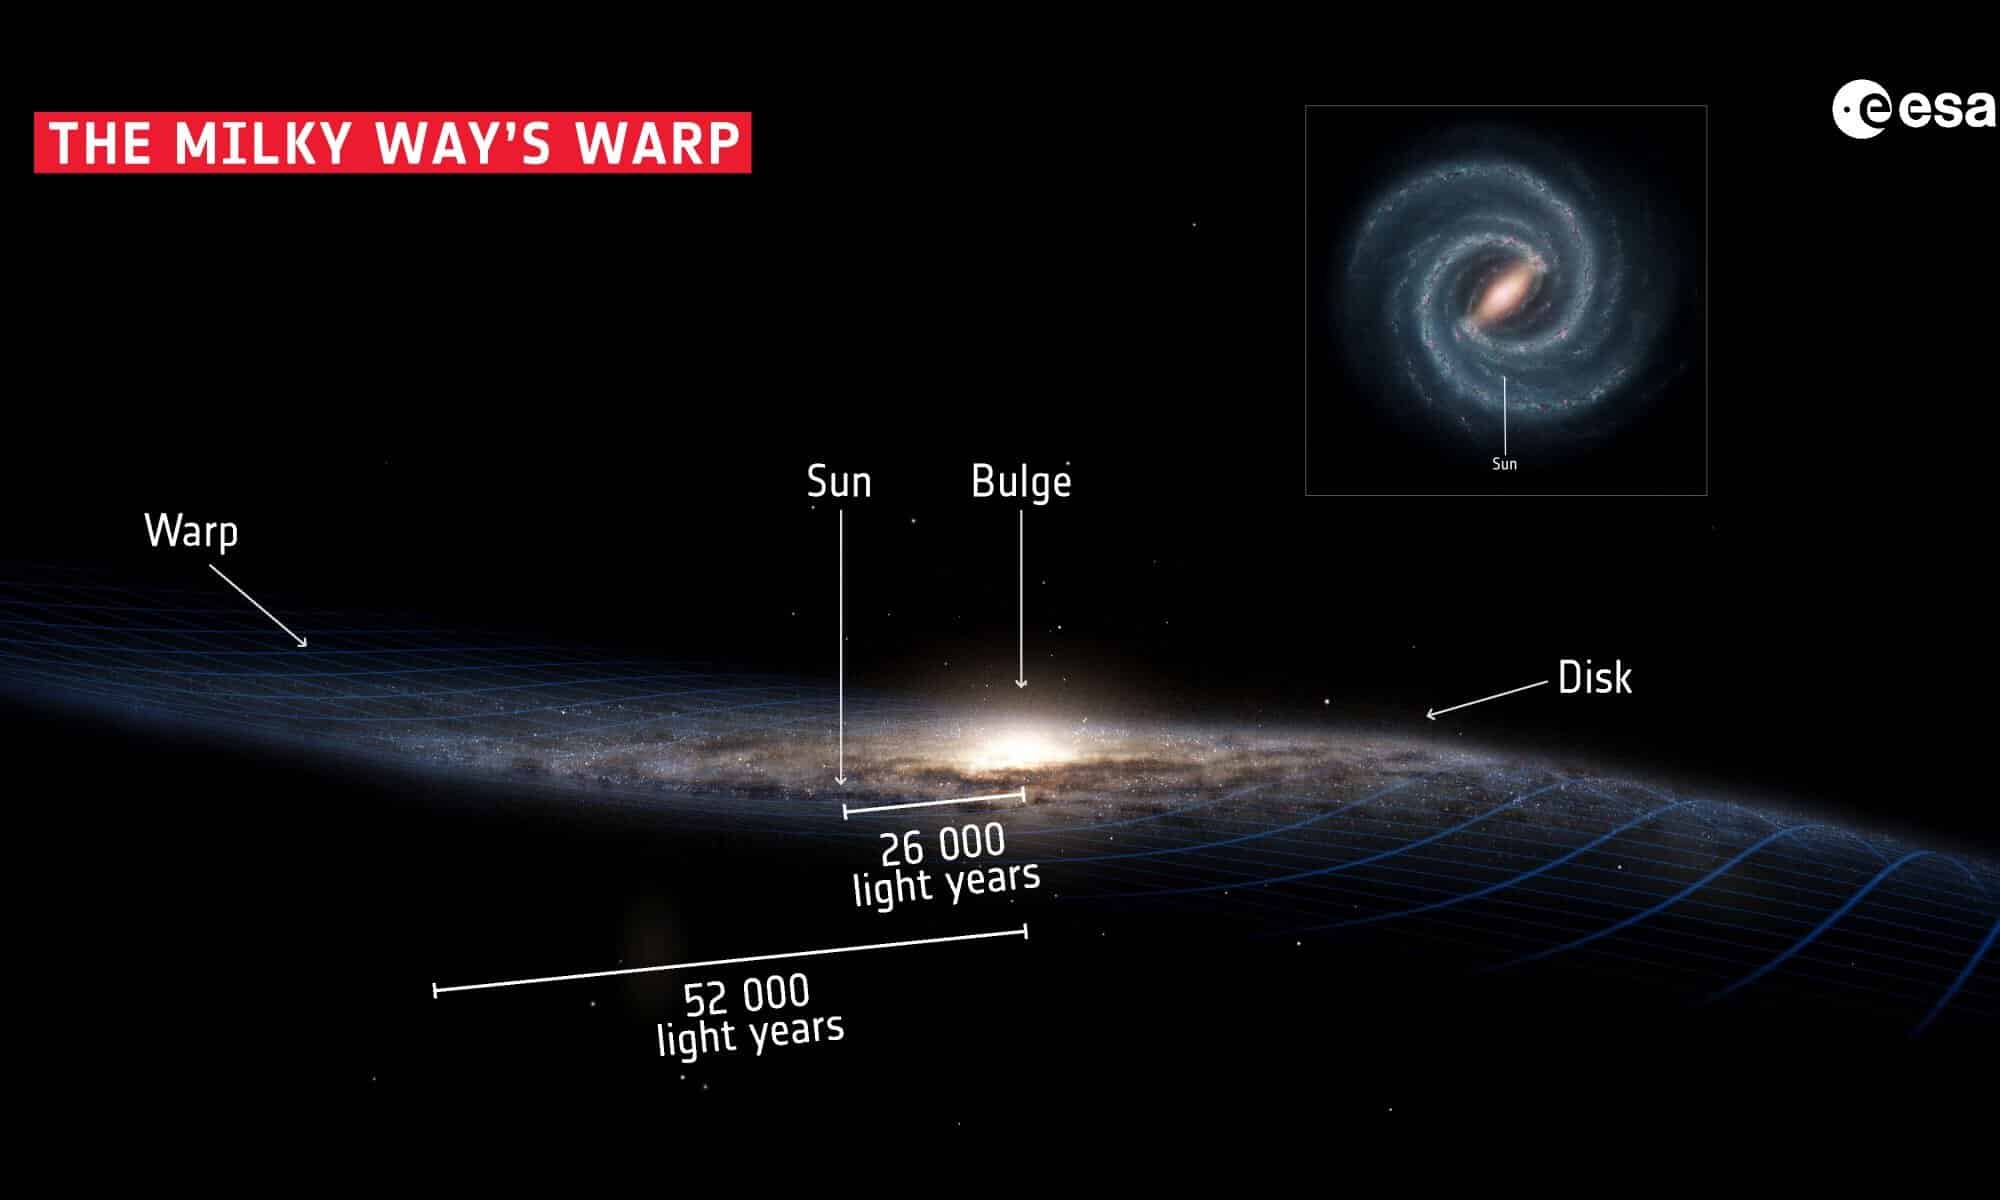 The Milky Way is Warped and Dark Matter Could be the Cause. ESA.